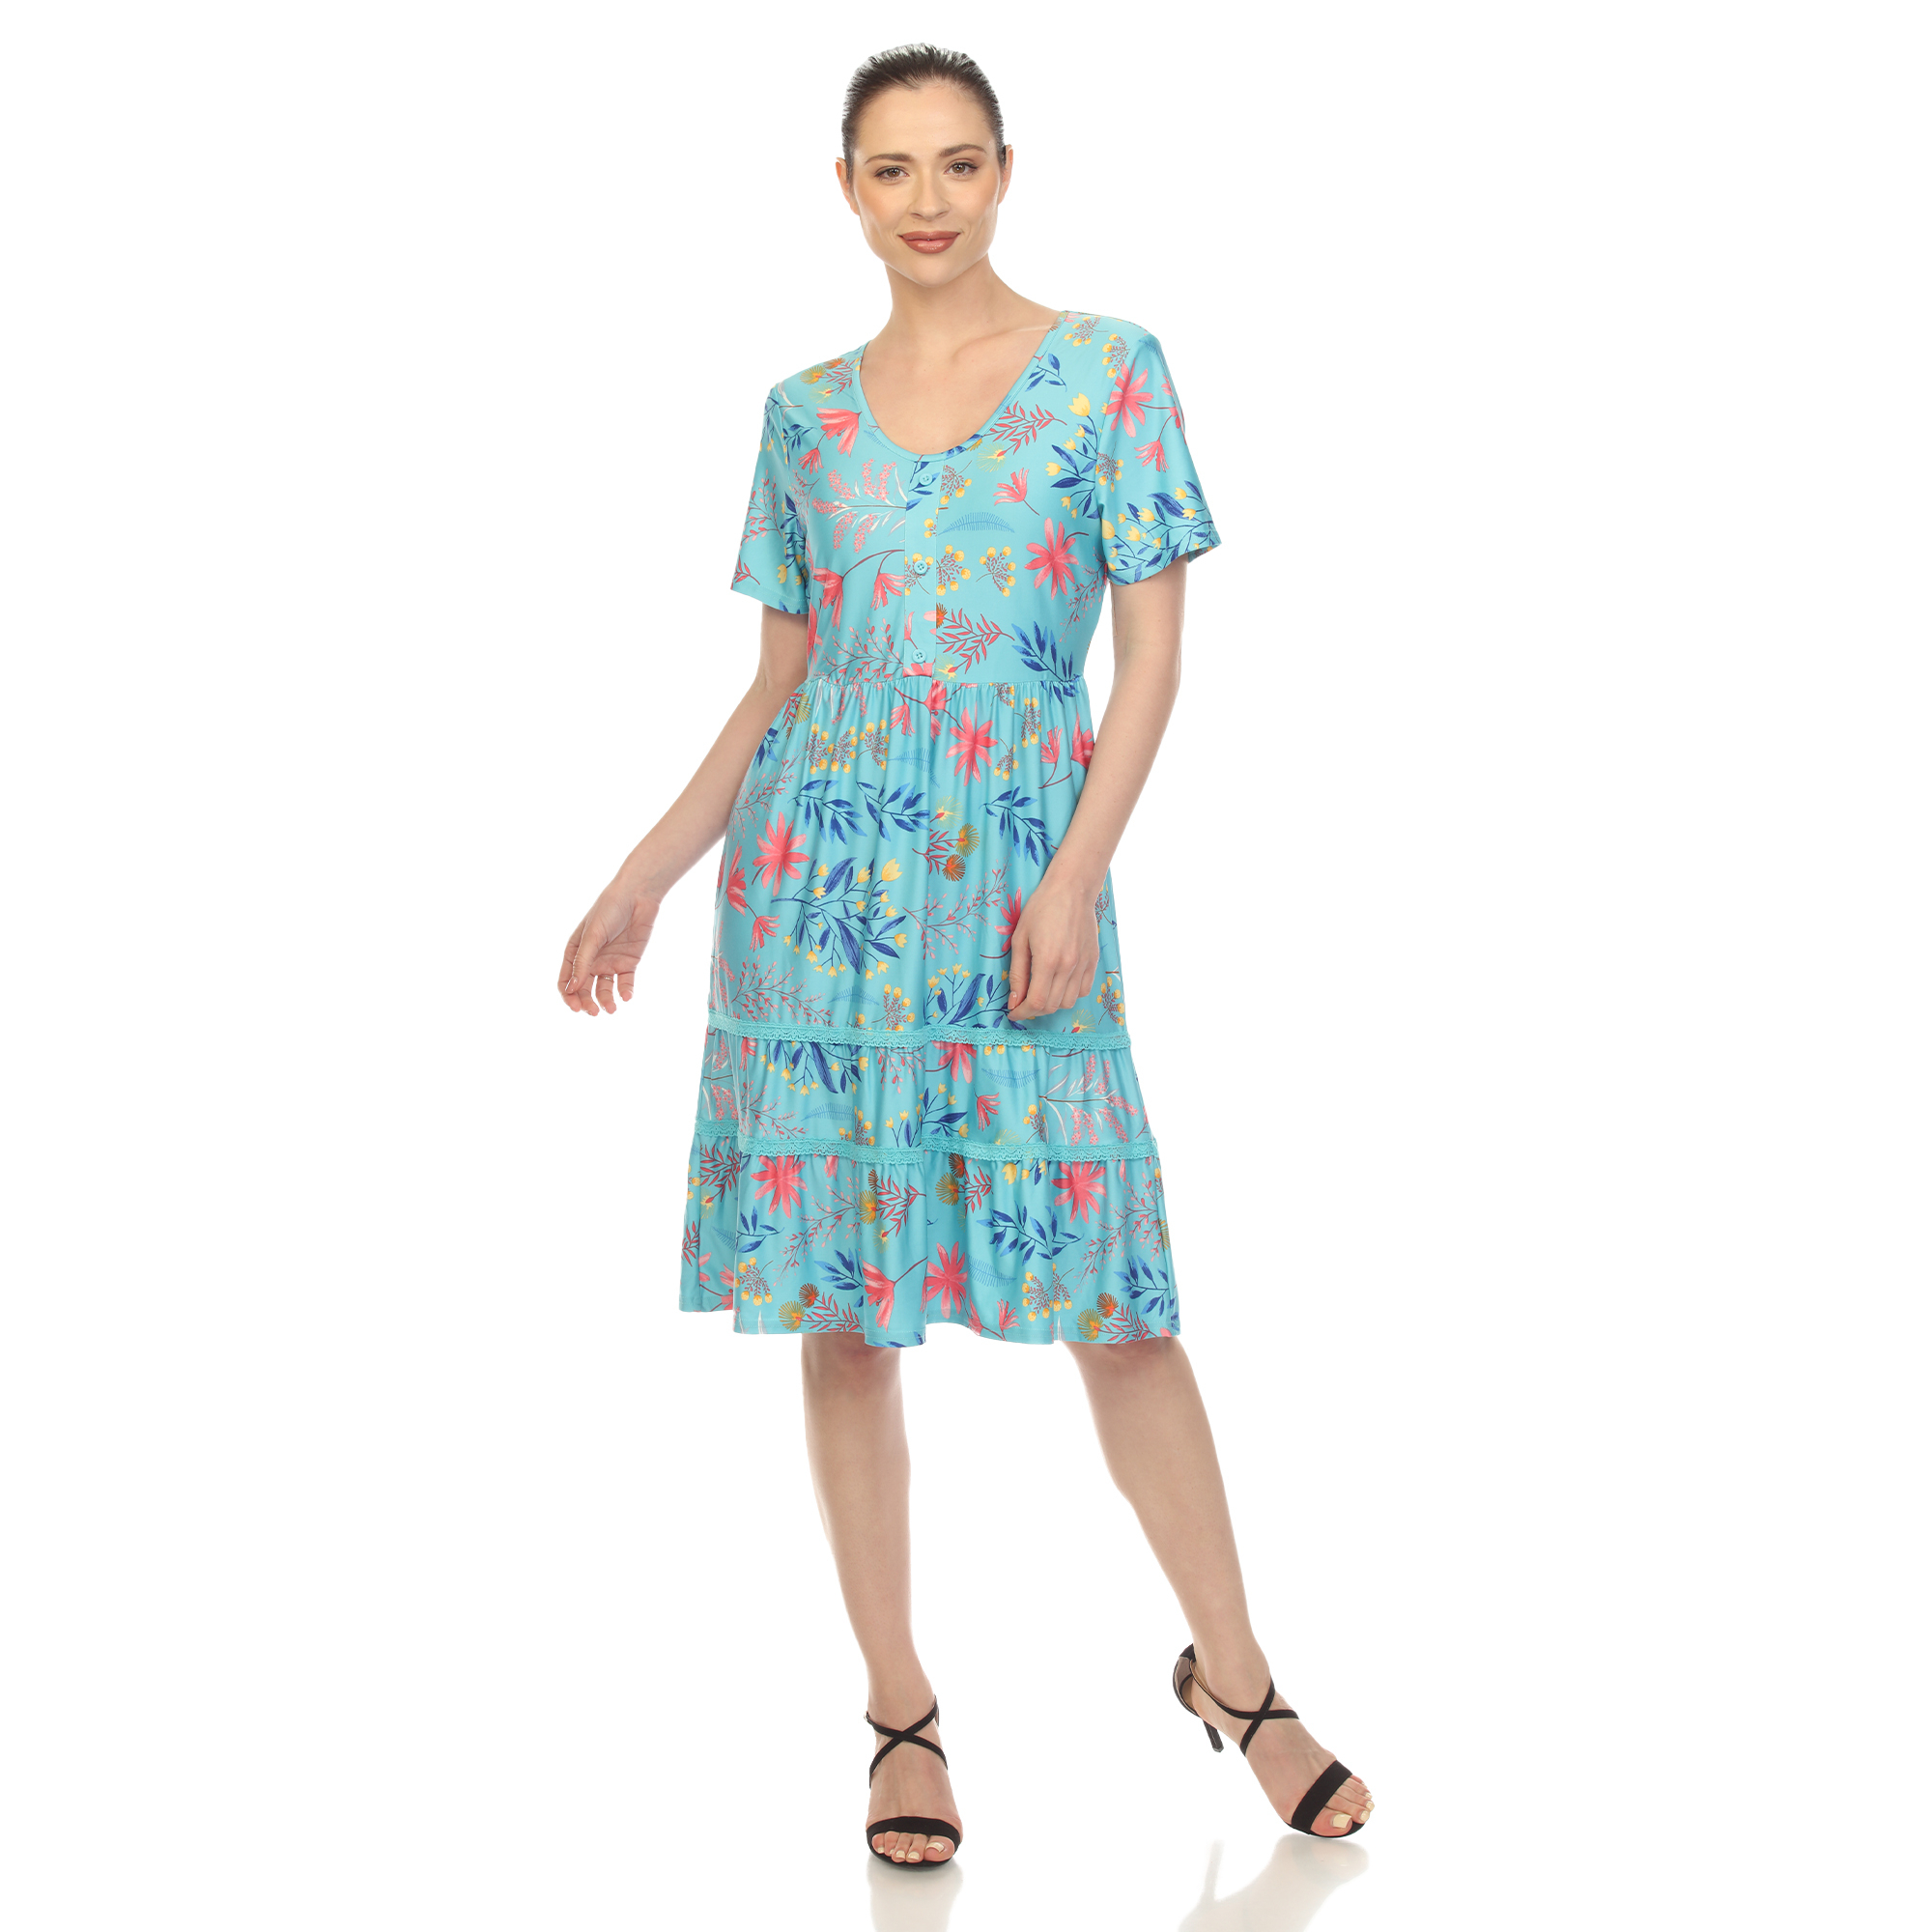 White Mark Women's Floral Short Sleeve Knee Length Tiered Dress - Blue, Small